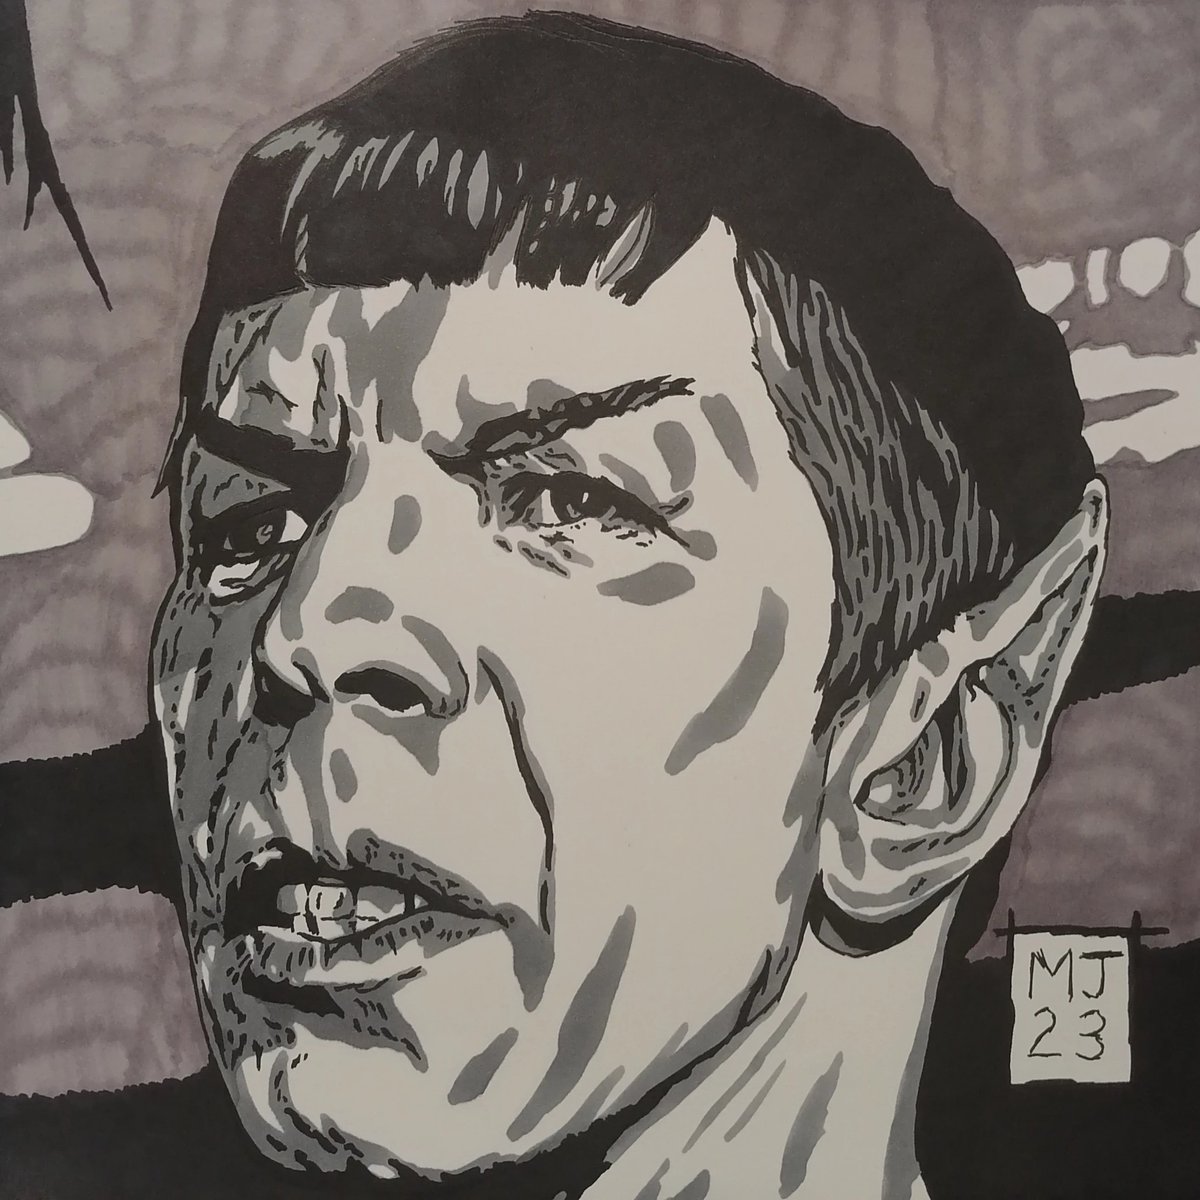 A drawing of the Vulcan Captain Spock, from Star Trek, created using a ball point pen and Graph'it markers. #captainspock #spock #spockedit #startrek #trekkie #trekkies #trekkiesforlife #startrekbeyond #startrekdiscovery #vulcan #marvel #marvelcomic #marvelcomics #comic #comics